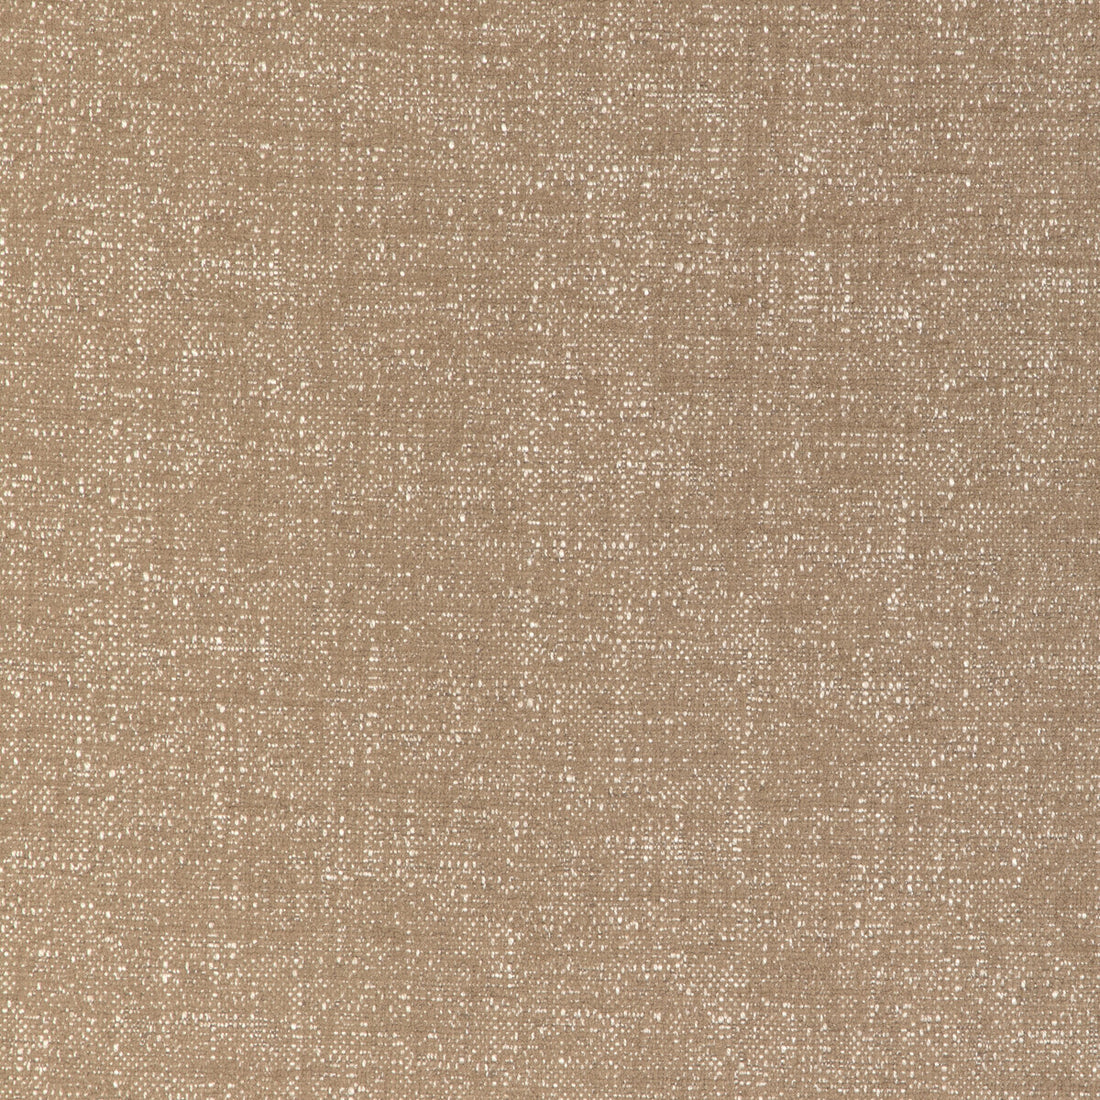 Kravet Design fabric in 36951-166 color - pattern 36951.166.0 - by Kravet Design in the Sustainable Textures II collection